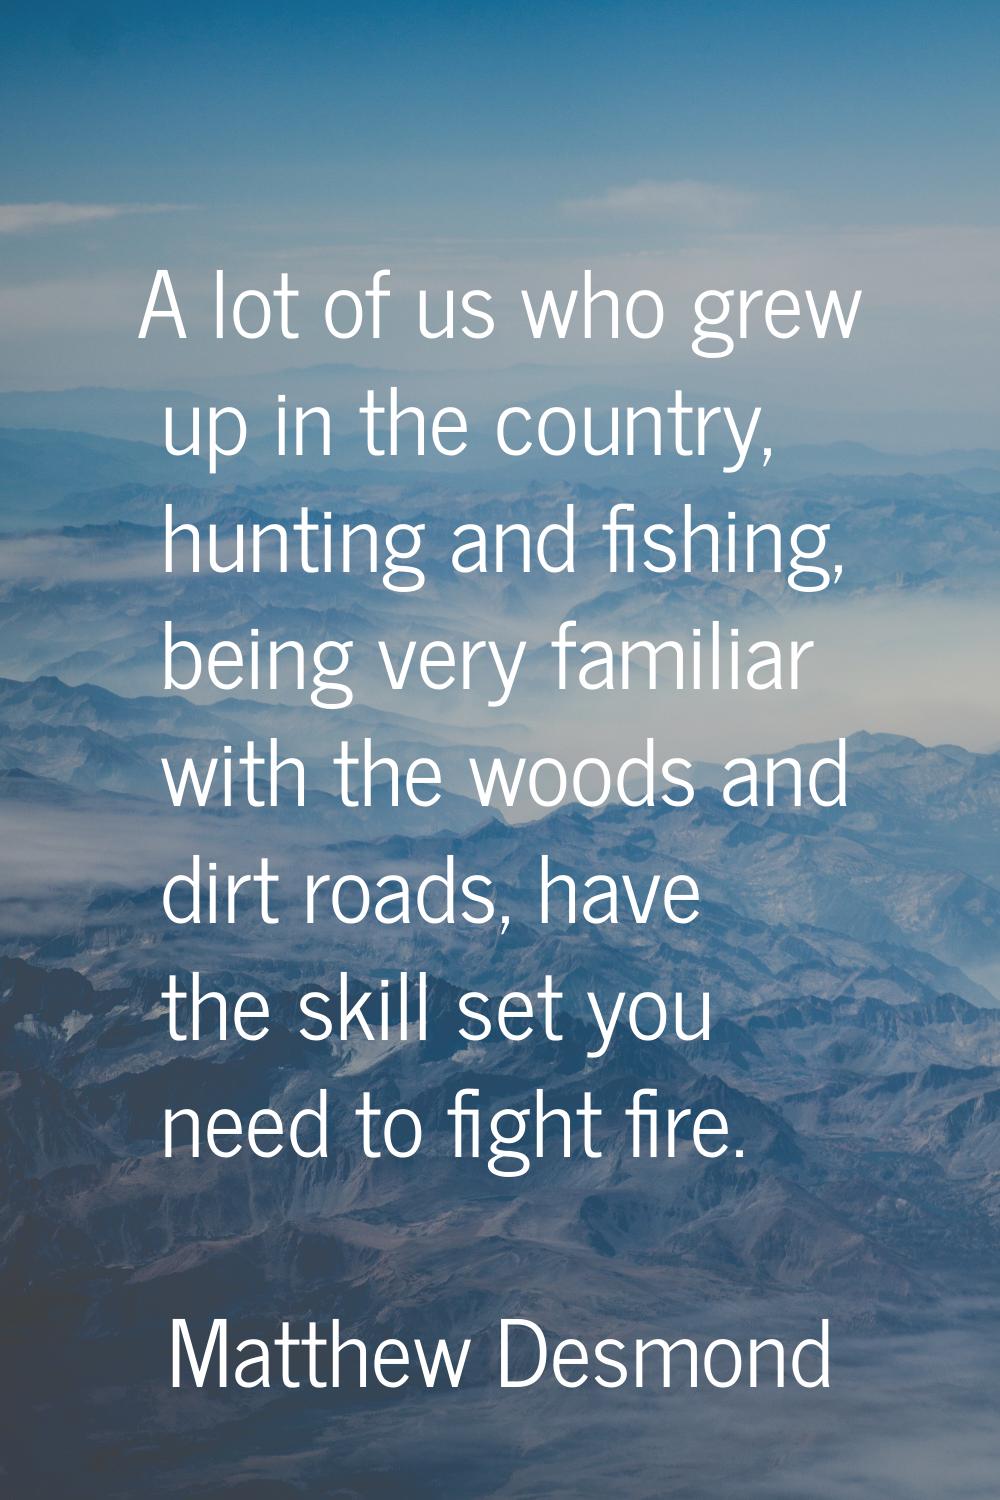 A lot of us who grew up in the country, hunting and fishing, being very familiar with the woods and